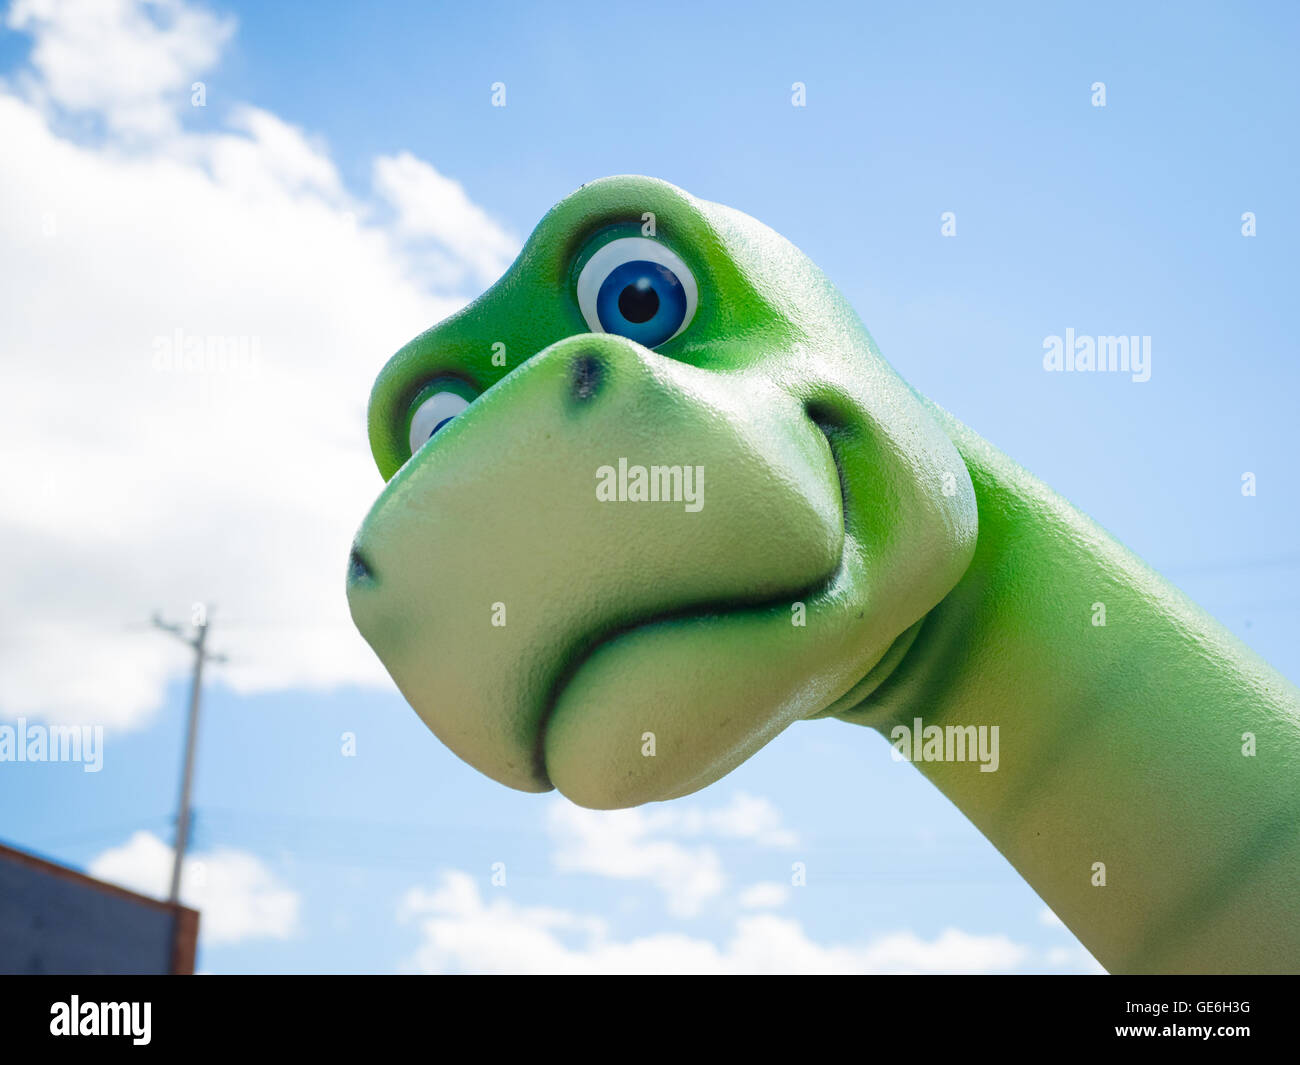 A friendly green dinosaur statue in the town of Drumheller, Alberta, Canada. Stock Photo